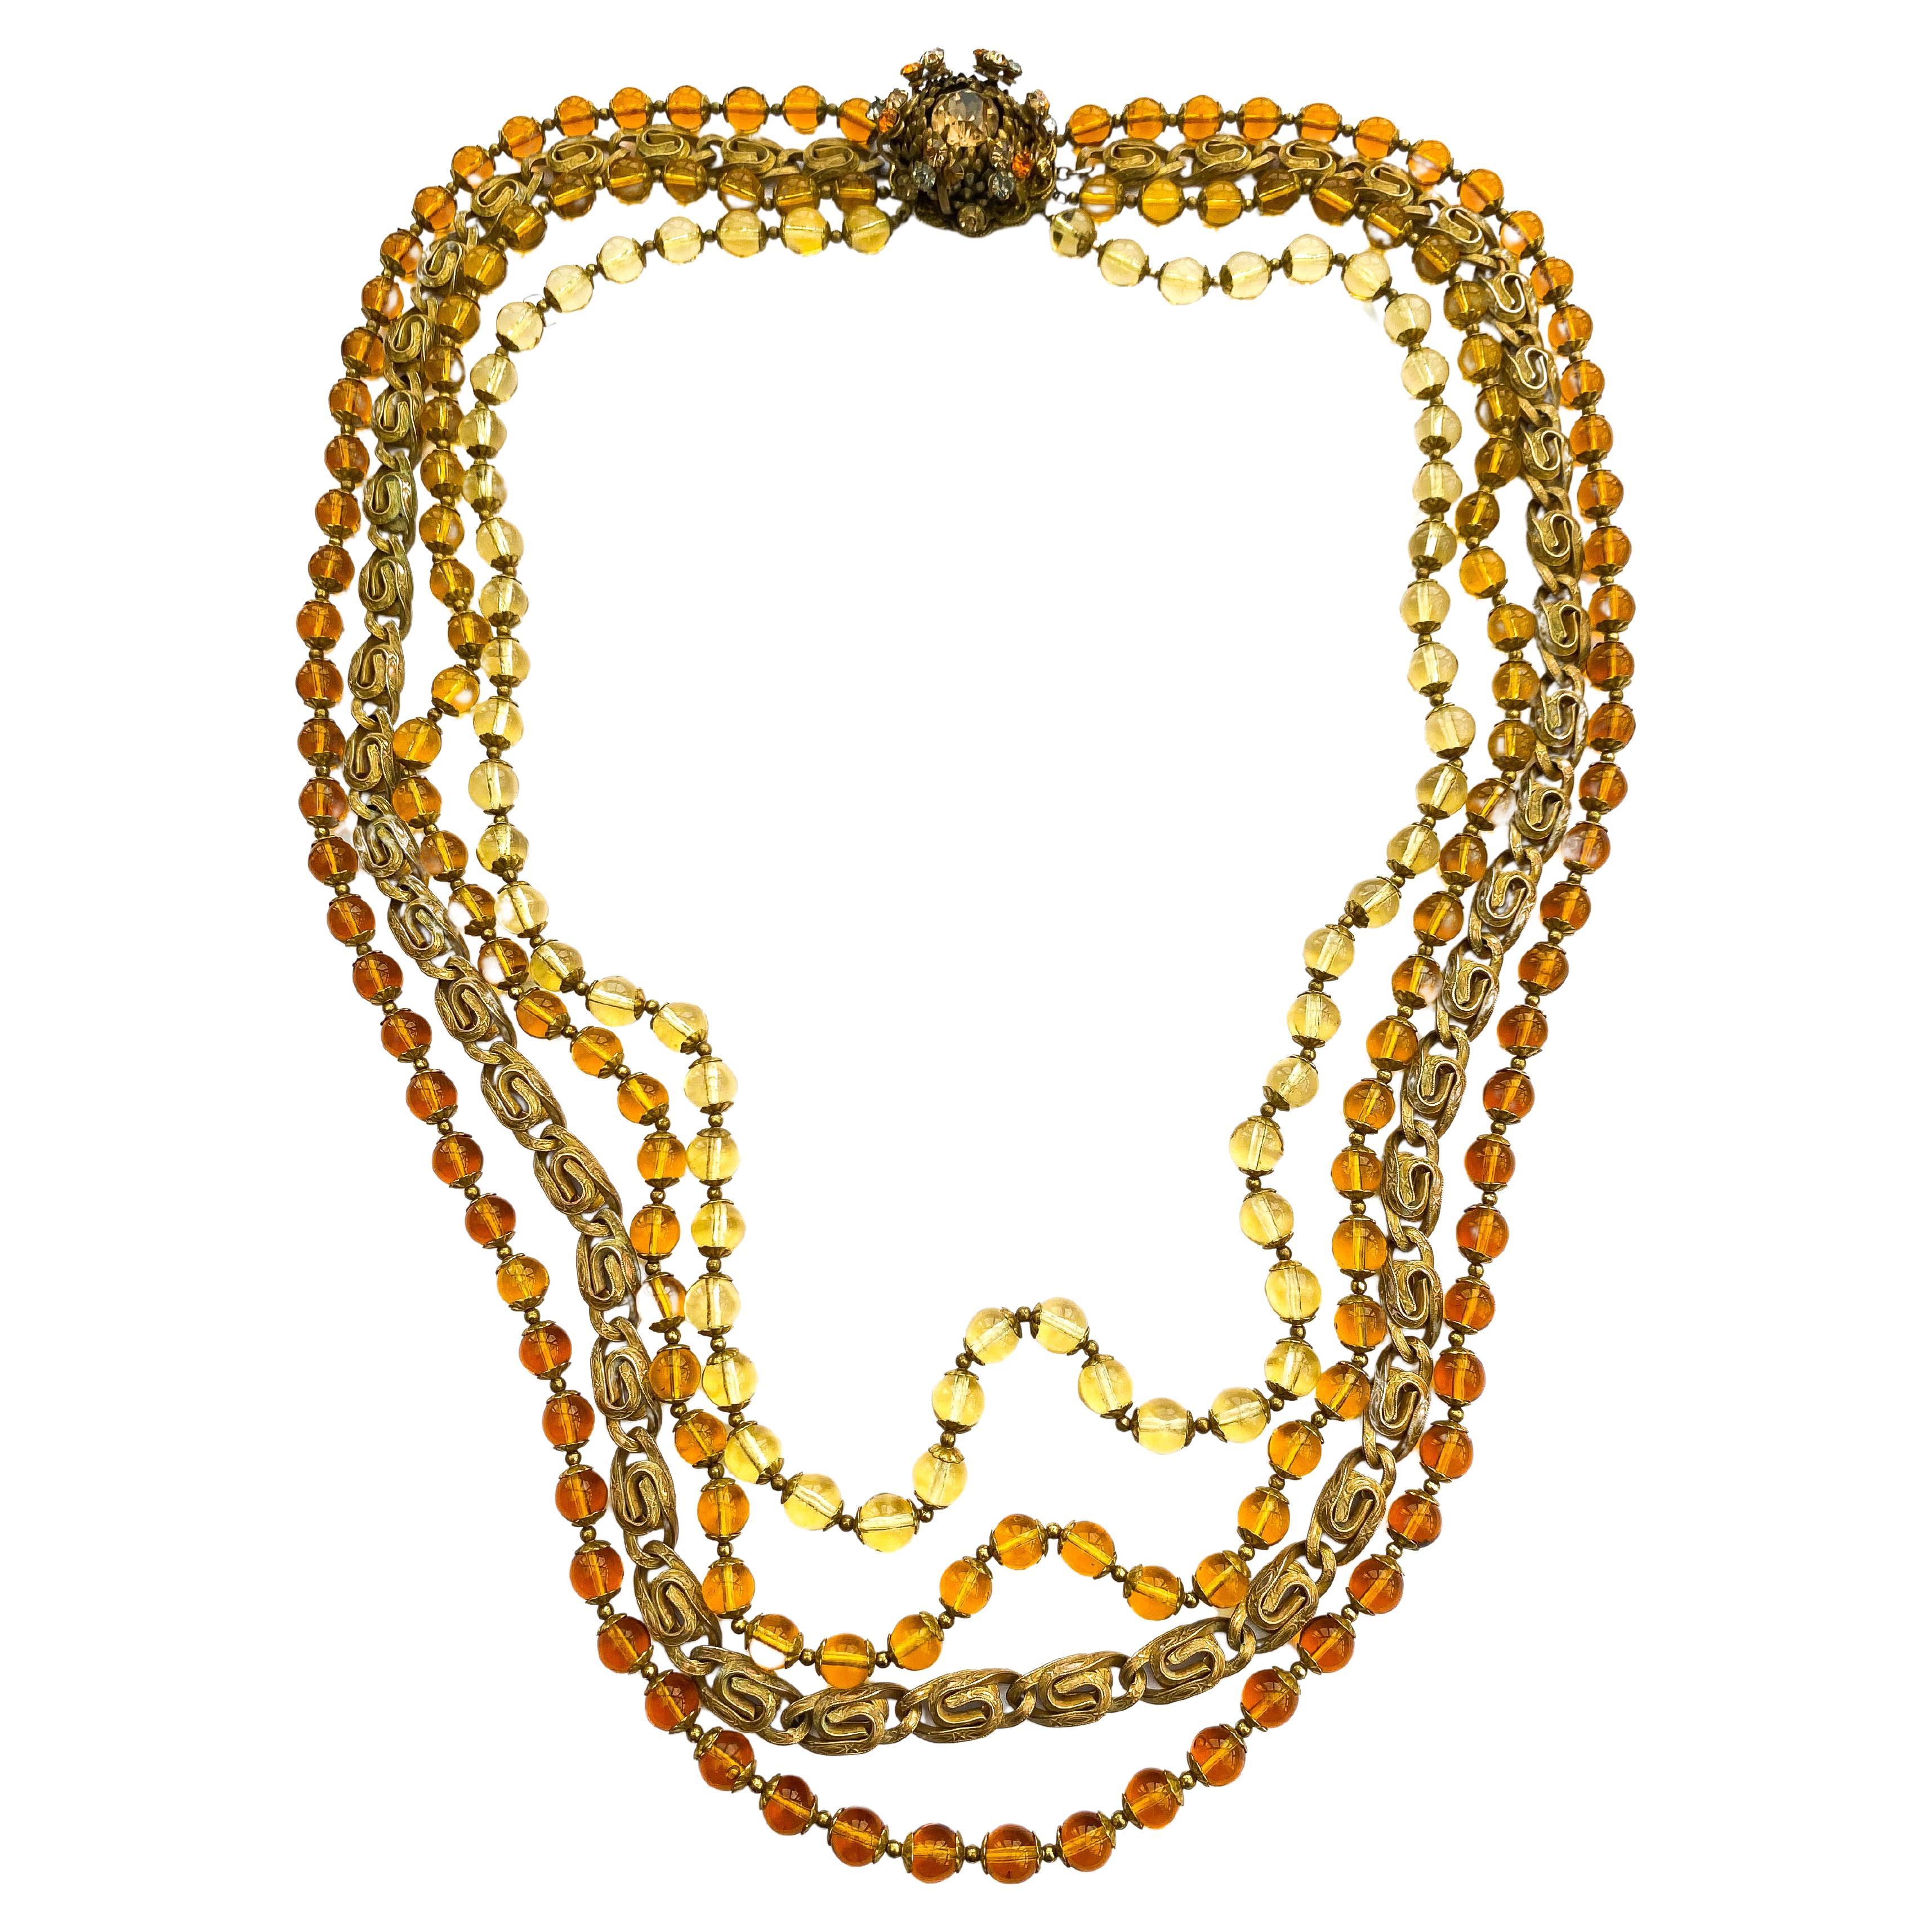 A striking and splendid show, this multi row glass bead and chain necklace, though unsigned, is undoubtedly Miriam Haskell, bearing all the hallmarks and composite elements characteristic of the celebrated designer. The decorative clasp in acorn or